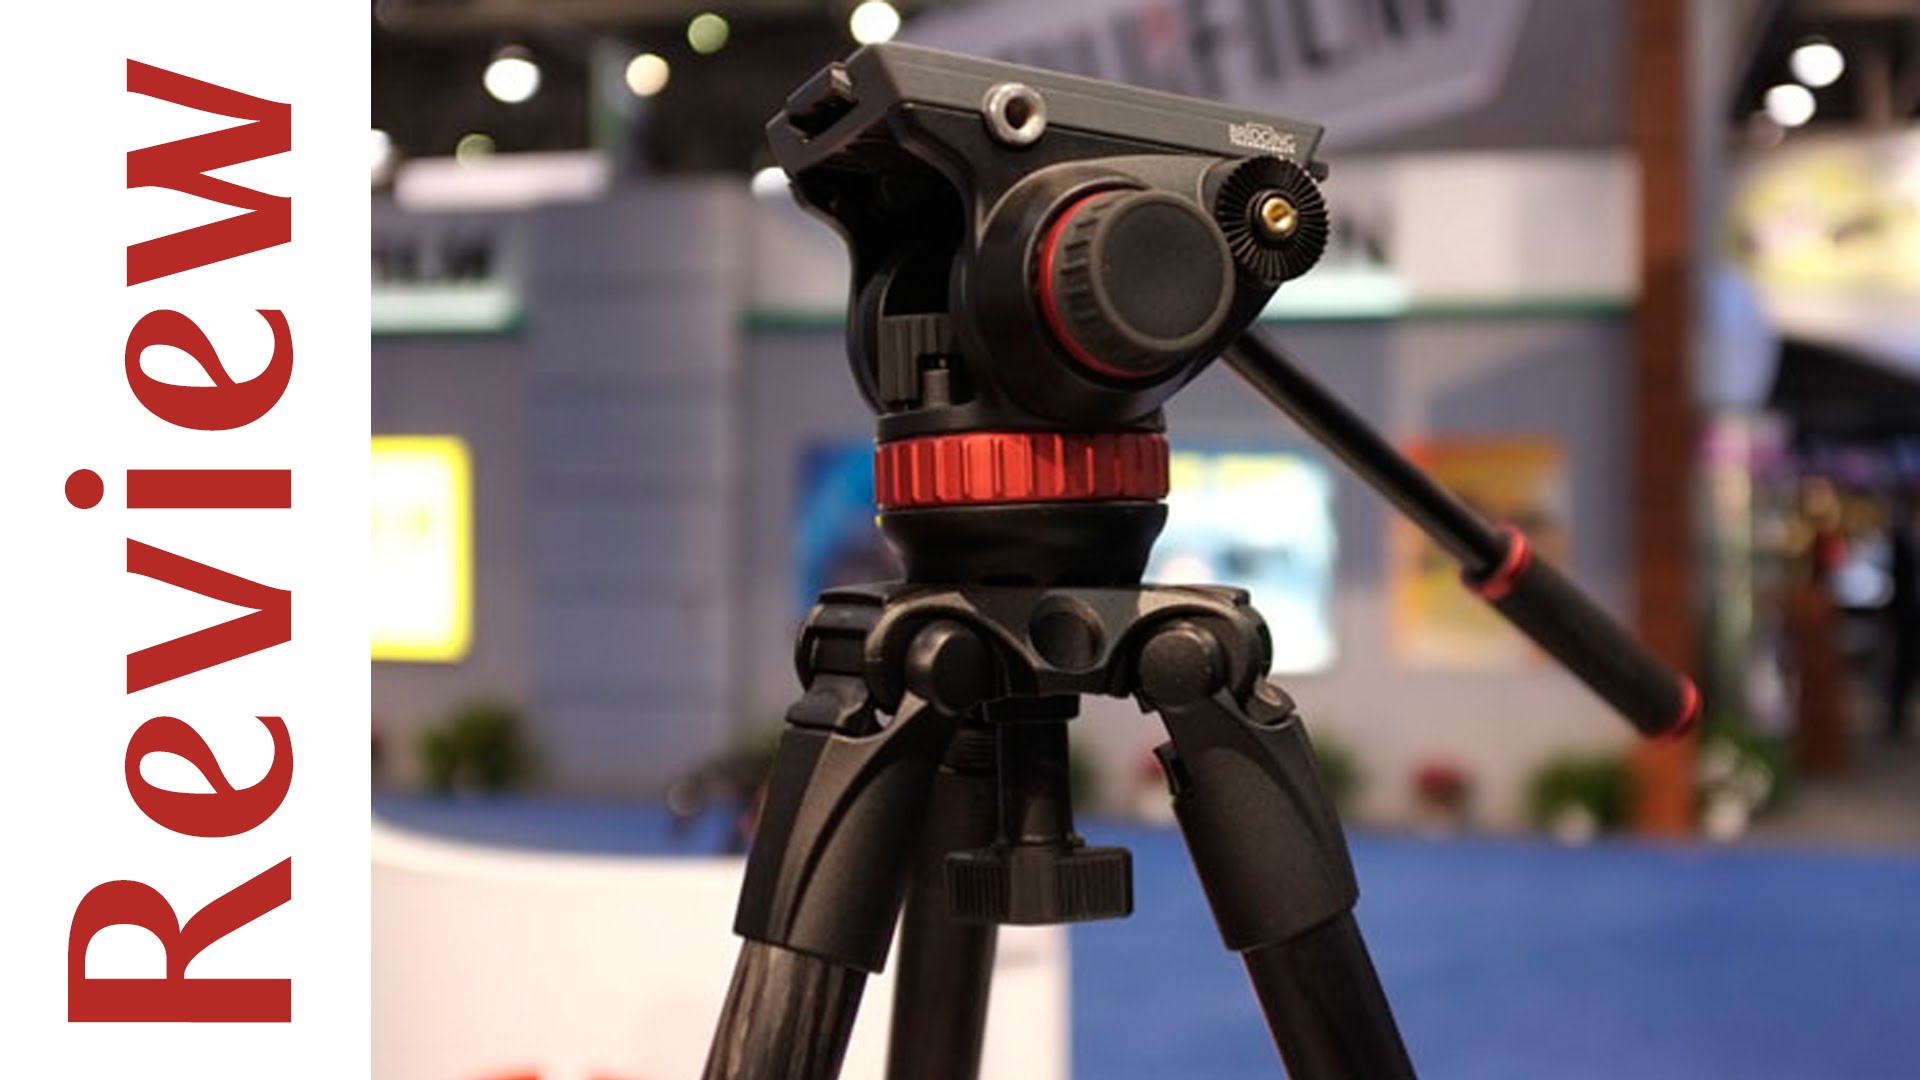 Review - Manfrotto 502HD Pro Video Head